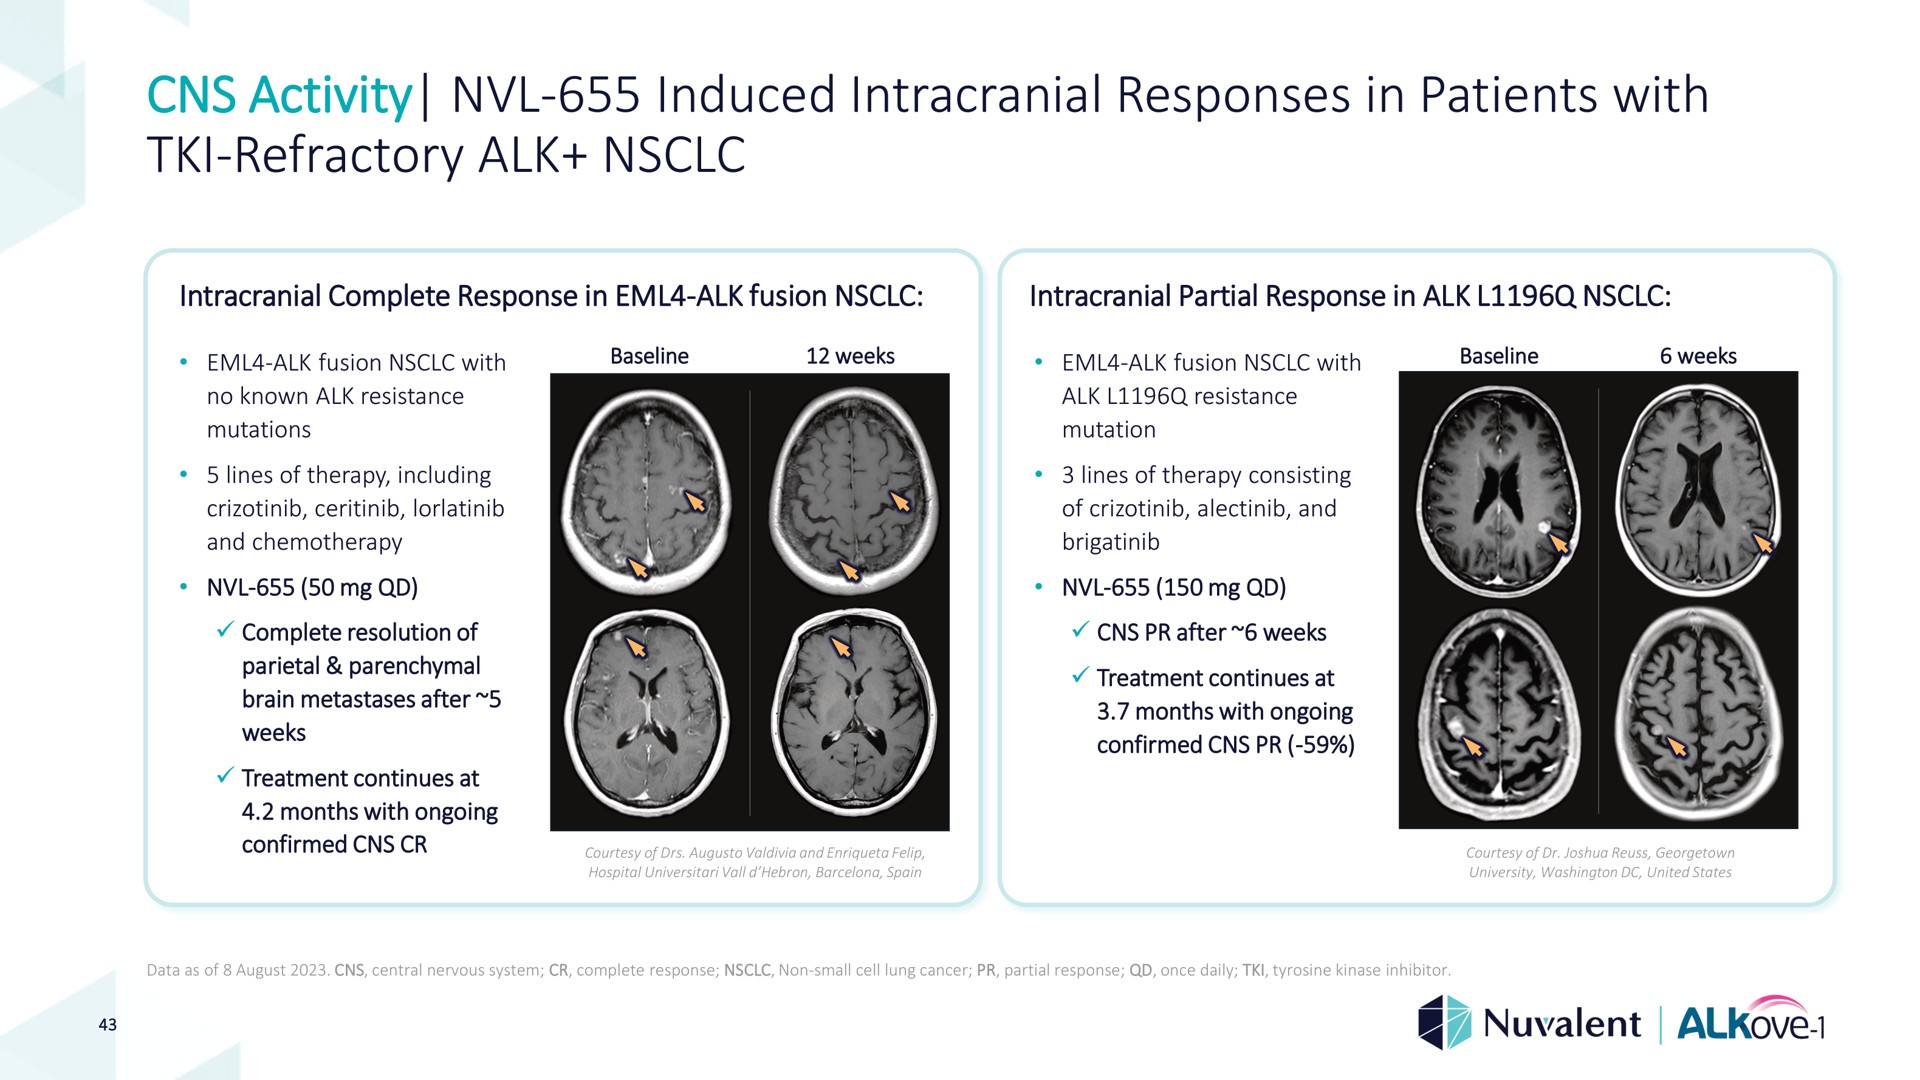 activity induced intracranial responses in patients with refractory alk refractory i | Nuvalent